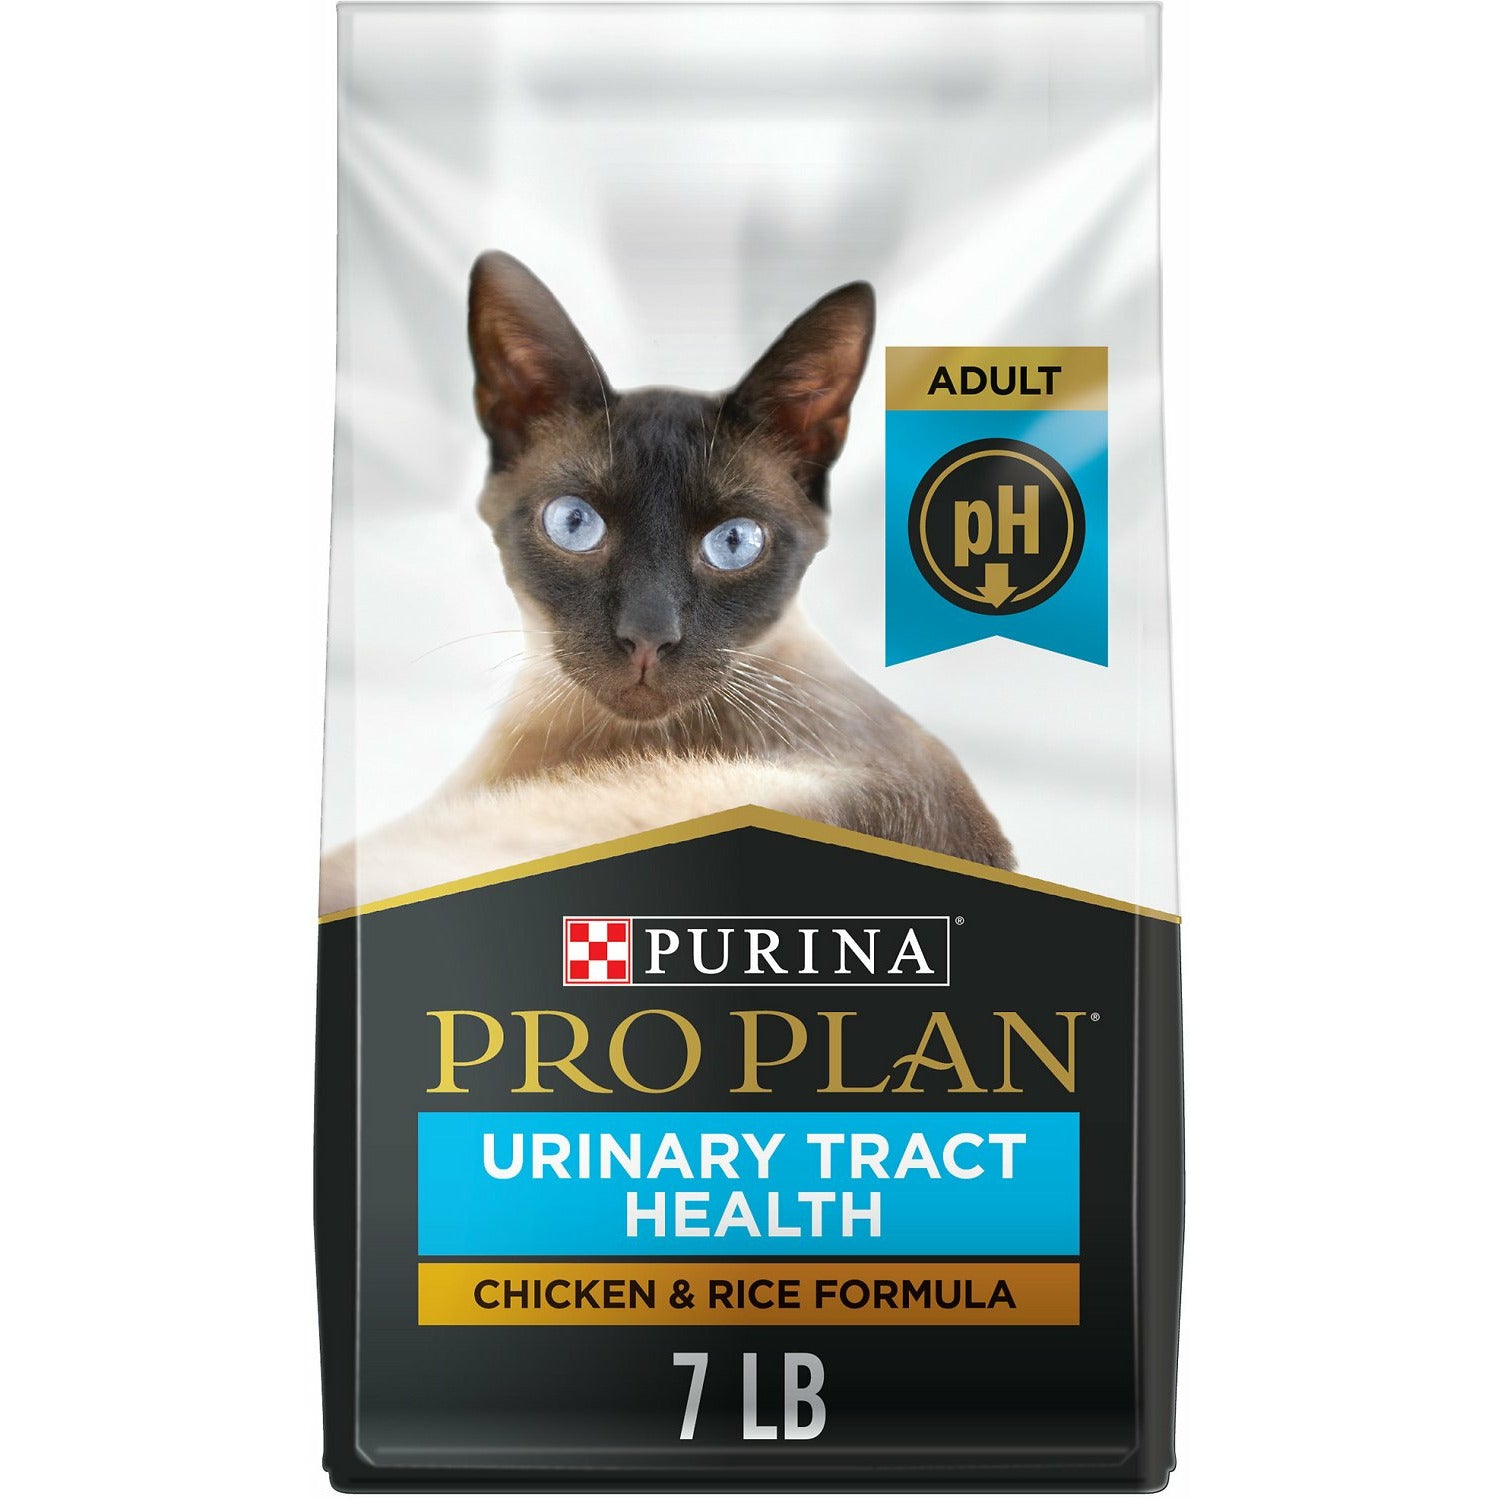 Purina Pro Plan Cat Food Adult Urinary Tract Health 3.18 Kg Cat Food 3.18 Kg | PetMax Canada